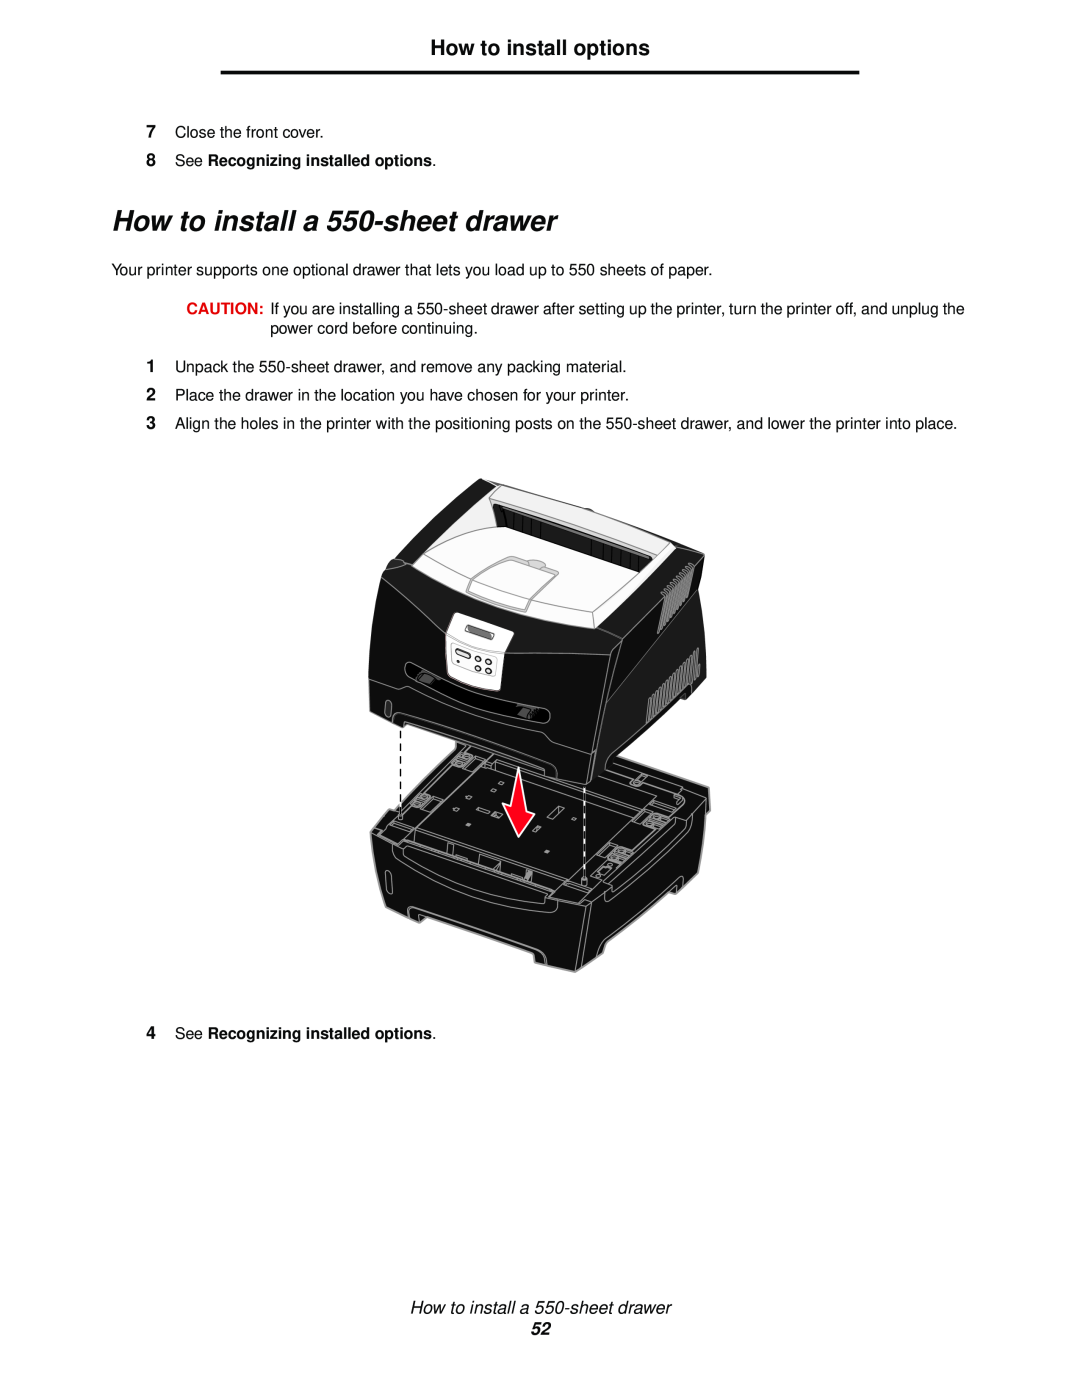 Lexmark 342n, 340 manual How to install a 550-sheet drawer, How to install options 